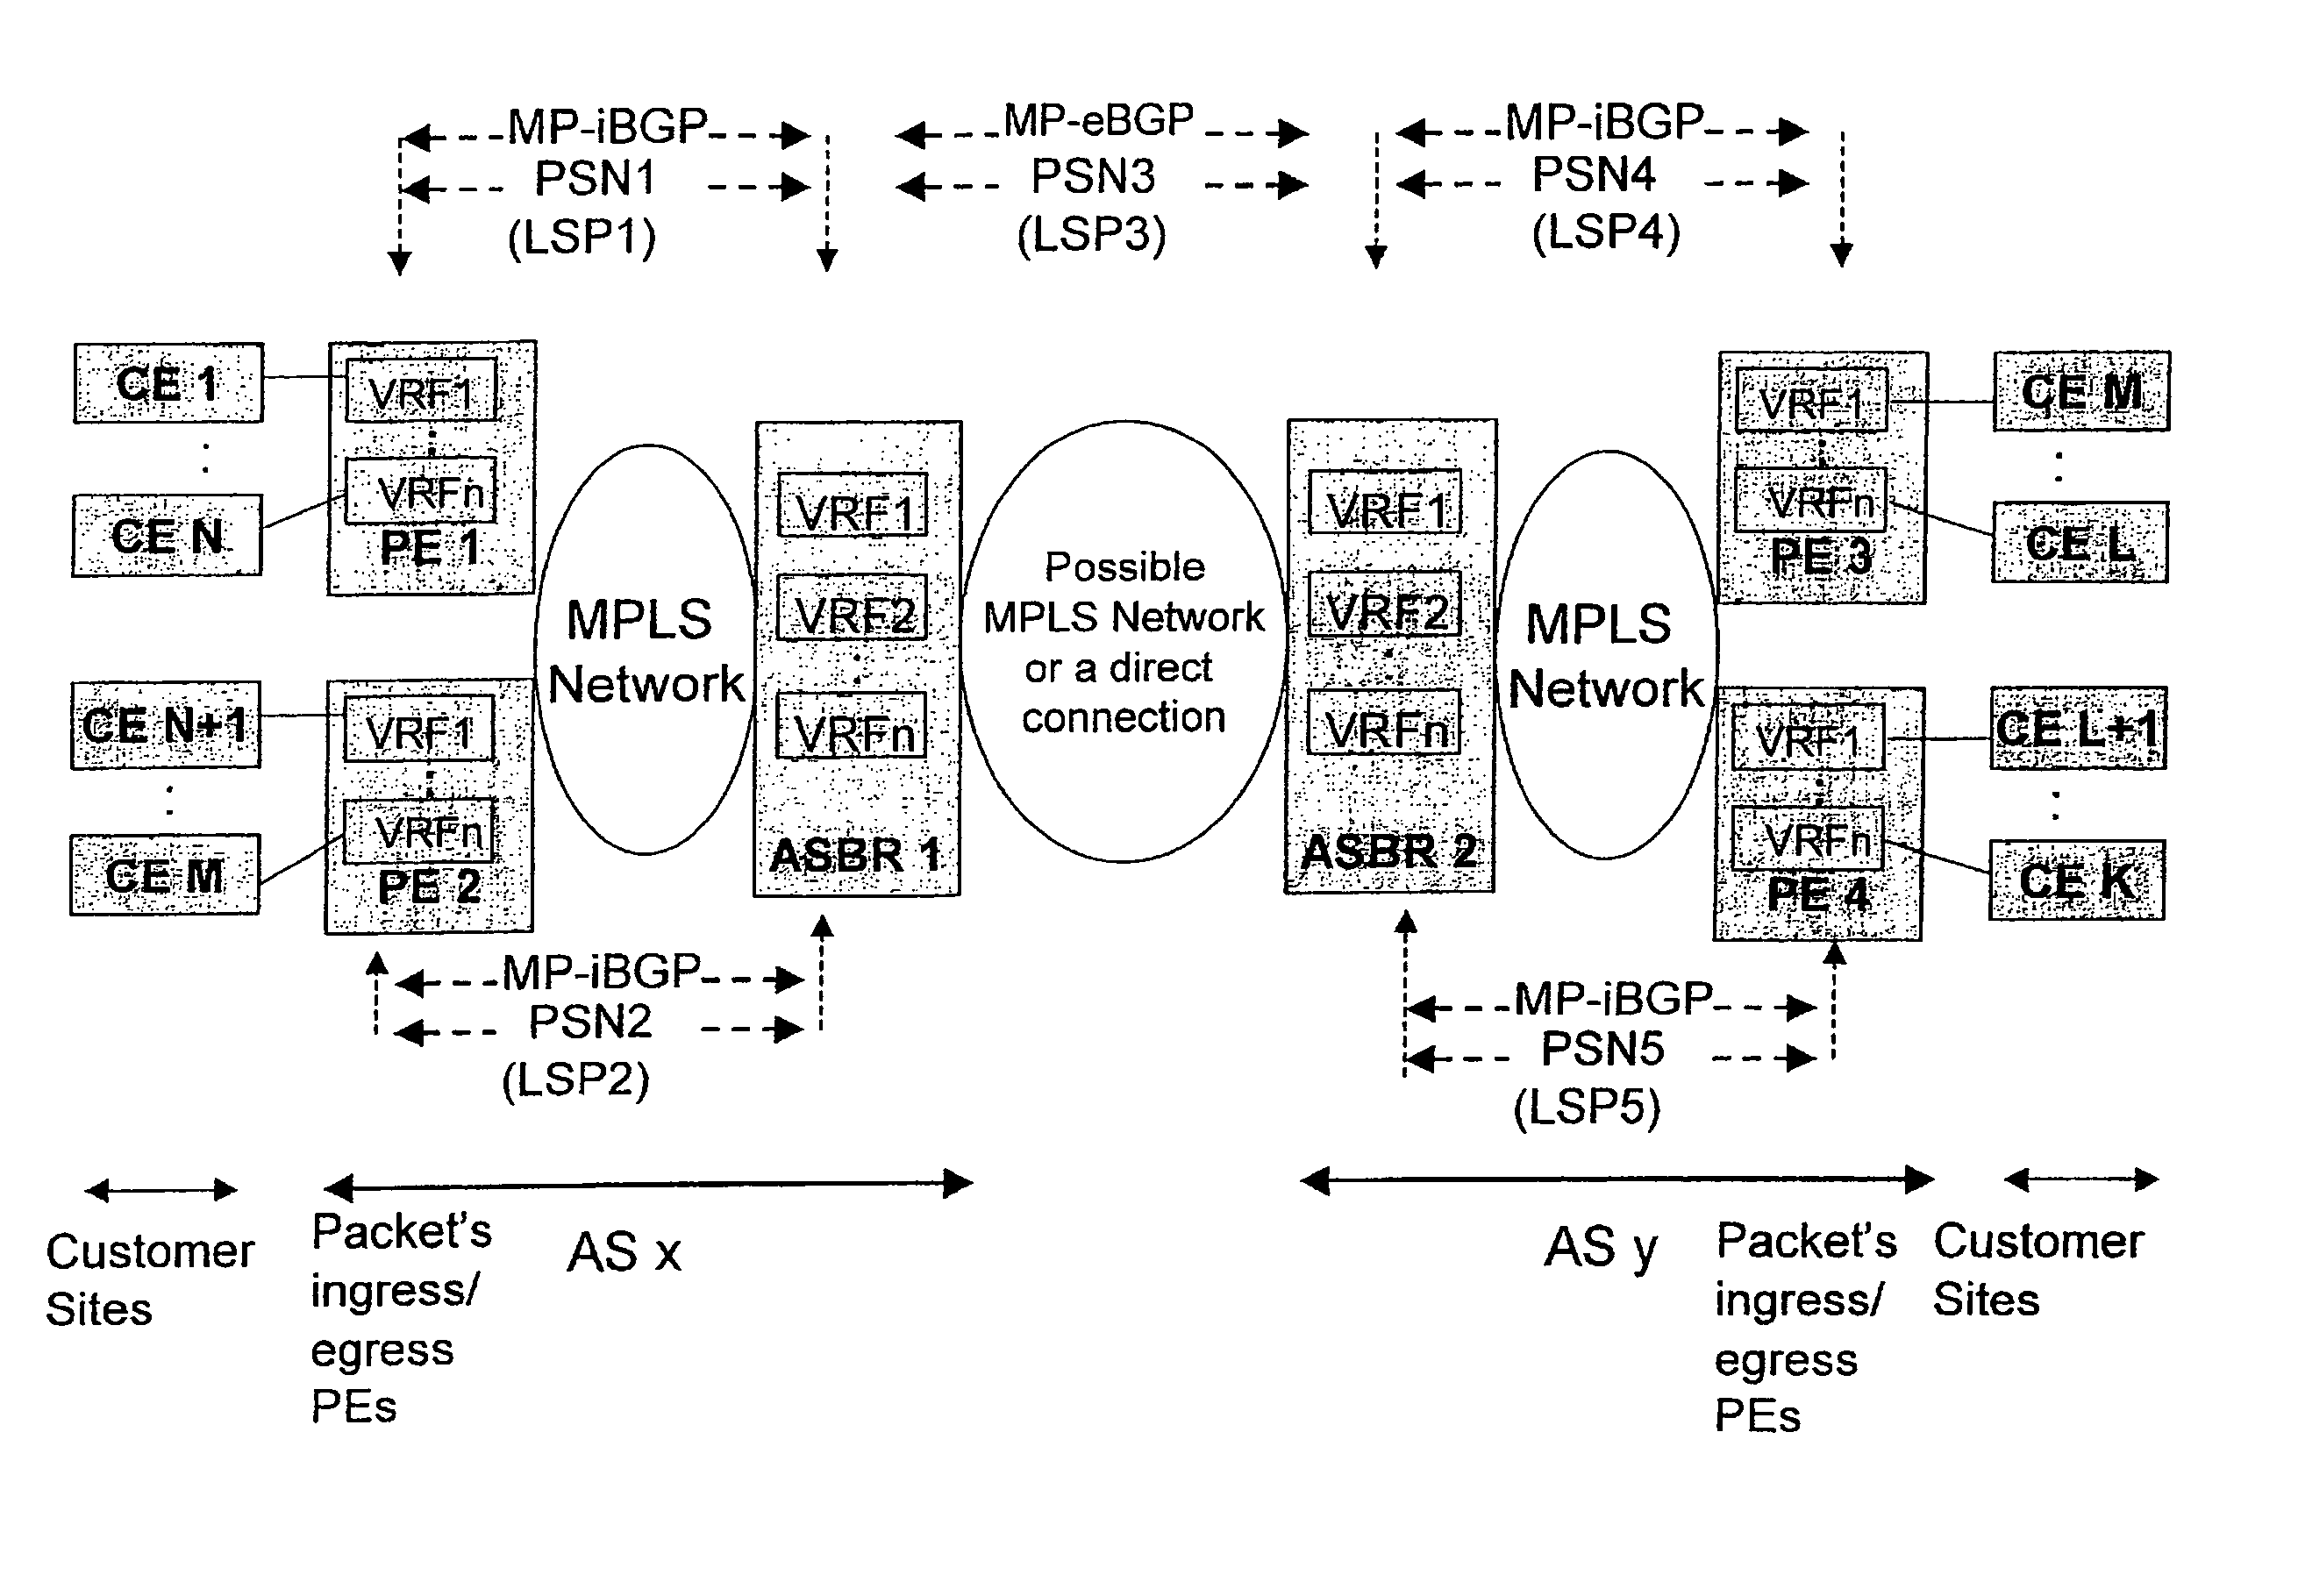 Method for providing virtual private network services between autonomous systems